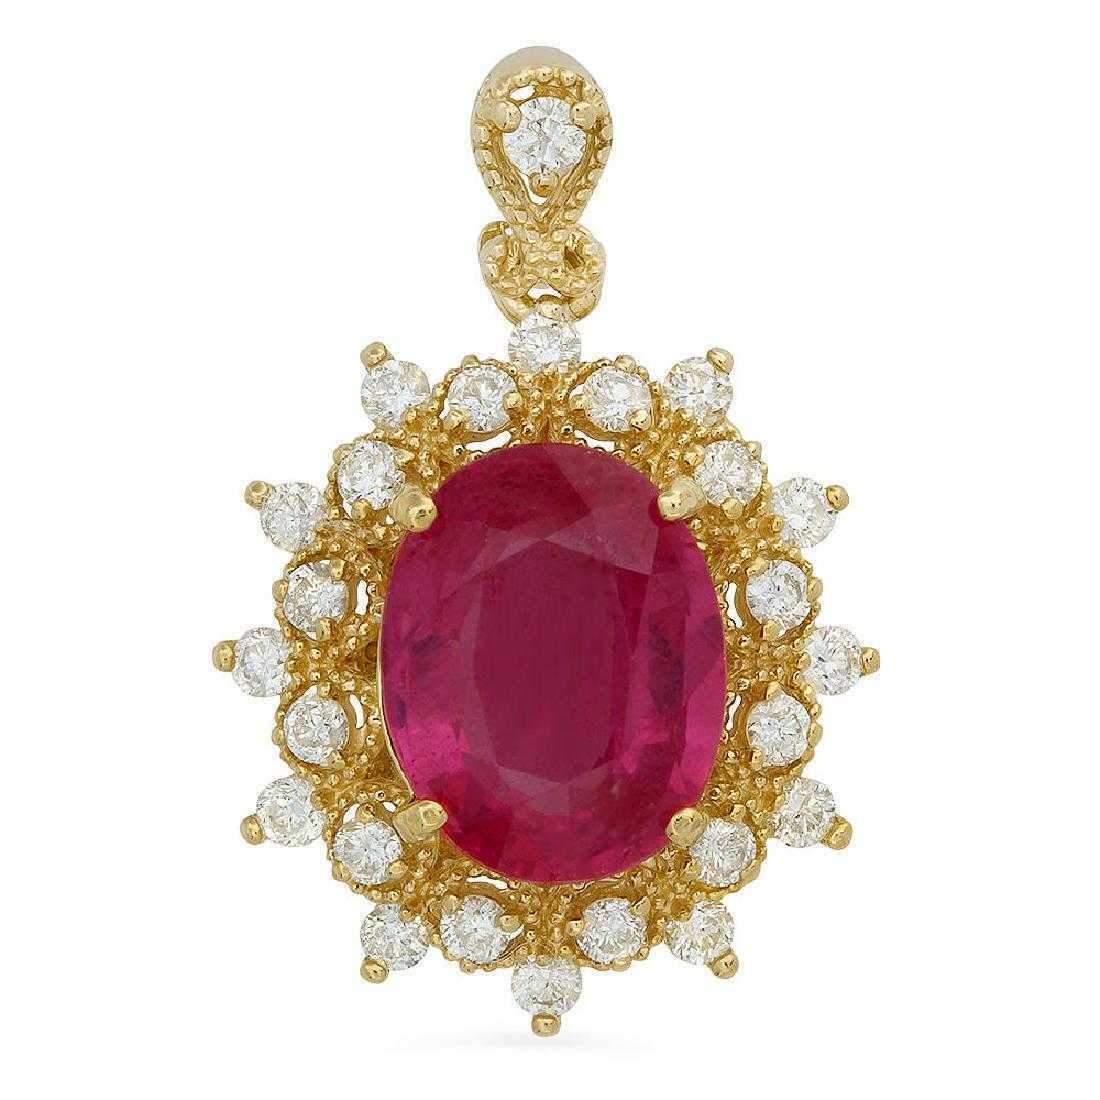 6.70Ct Natural Red Ruby and Natural Diamond 14K Solid Yellow Gold Necklace

Amazing looking piece!

Stamped: 14K

Oval-Cut Ruby Weight is Approx. 6.00 Carats

Ruby Measures: 12 x 10mm

Ruby Treatment: Fracture Filling

Total Natural Round Diamond